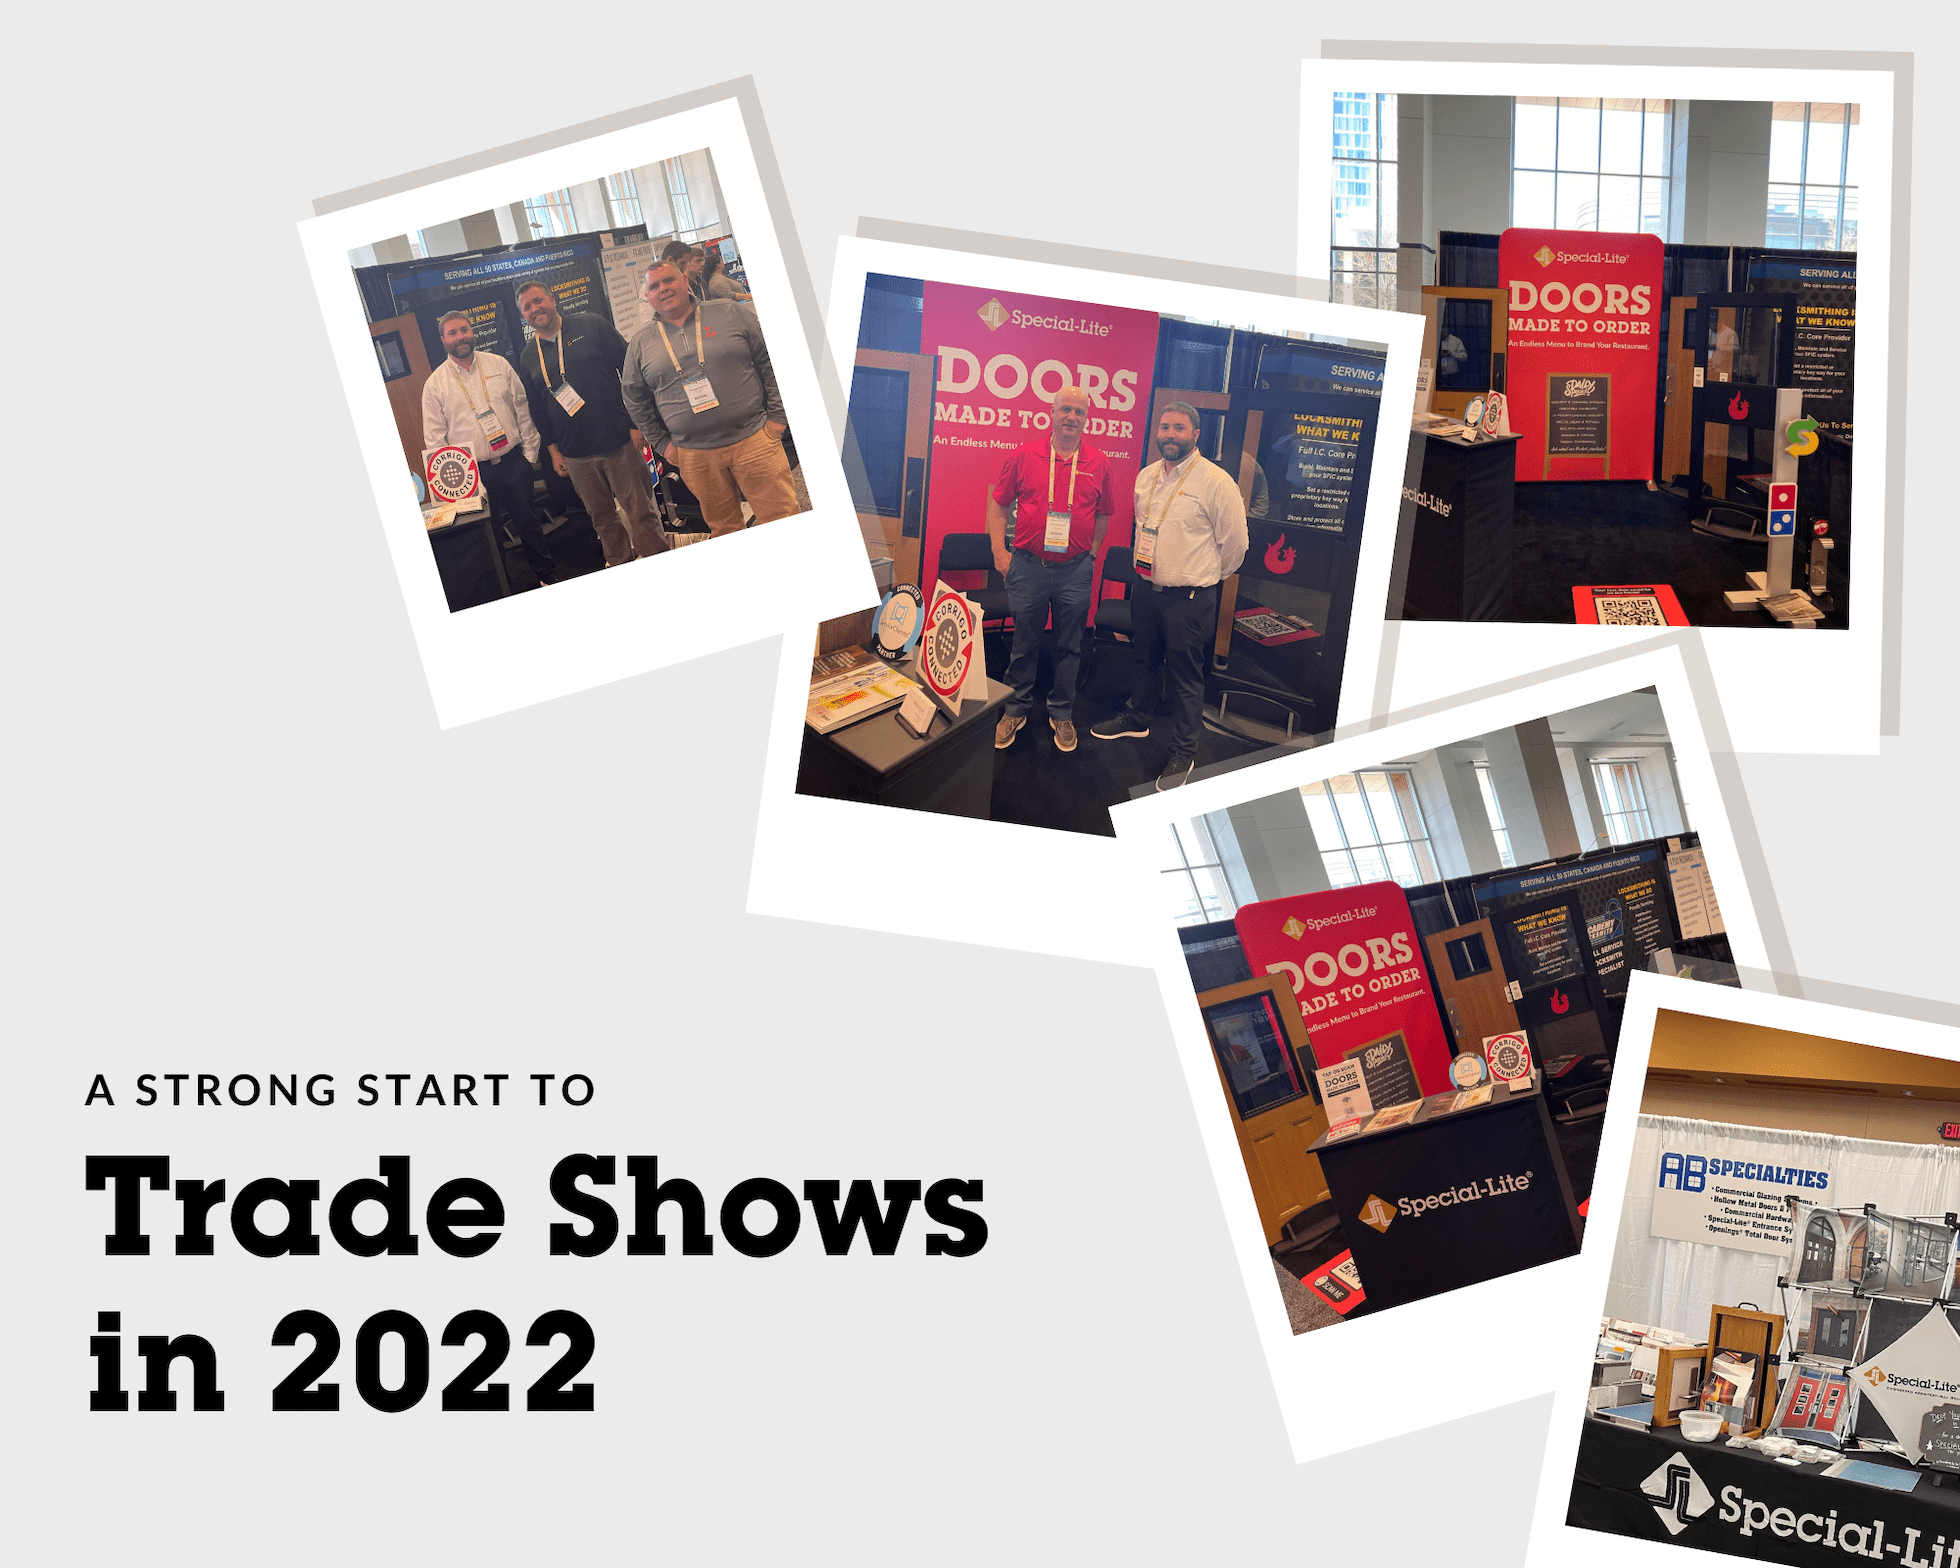 A strong start to 2022 trade shows featuring restaurant 